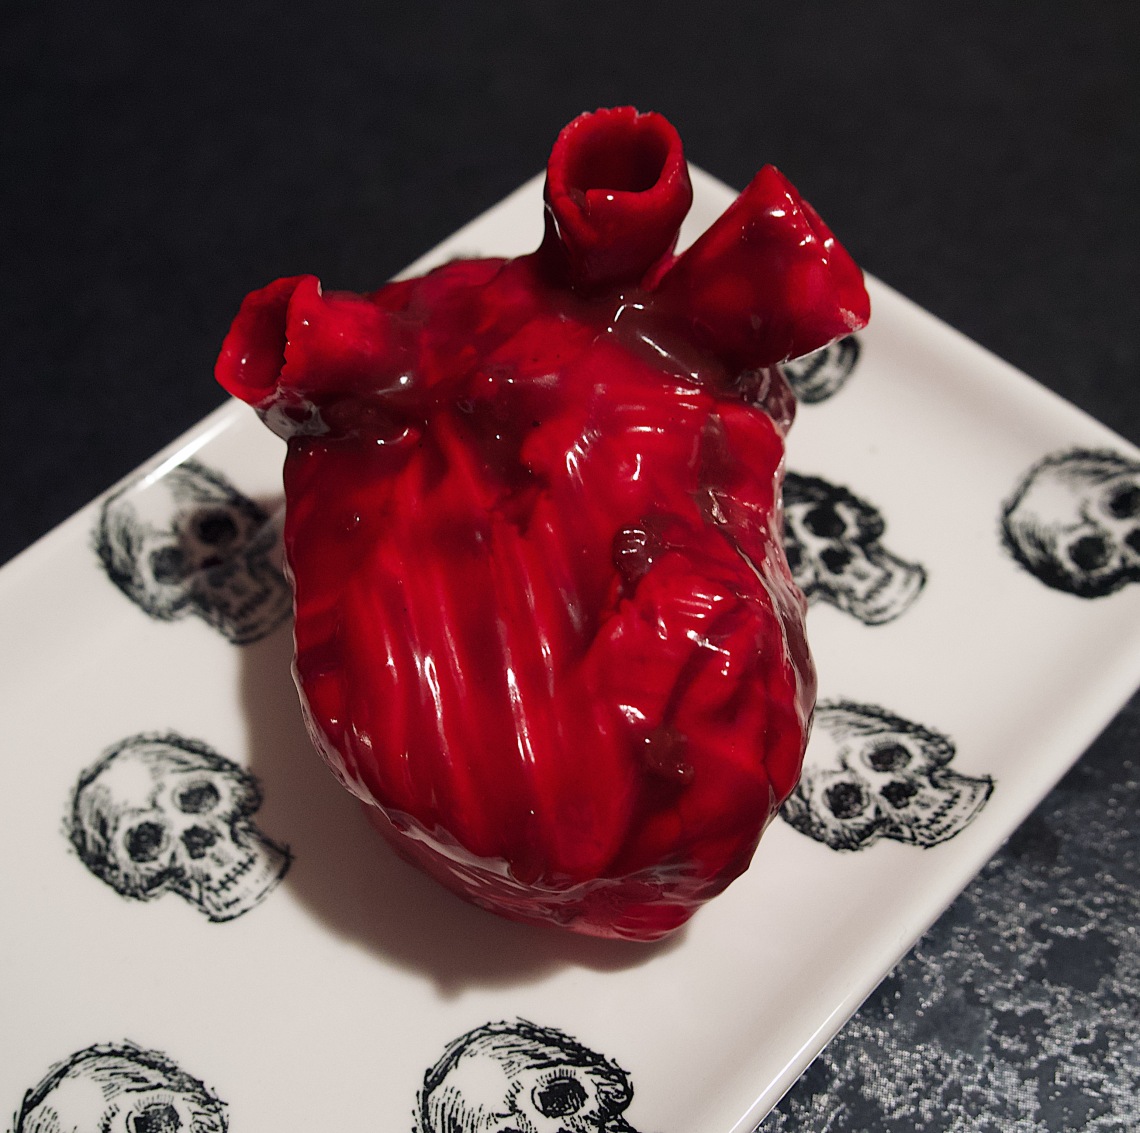 Human heart cupcakes made with fondant